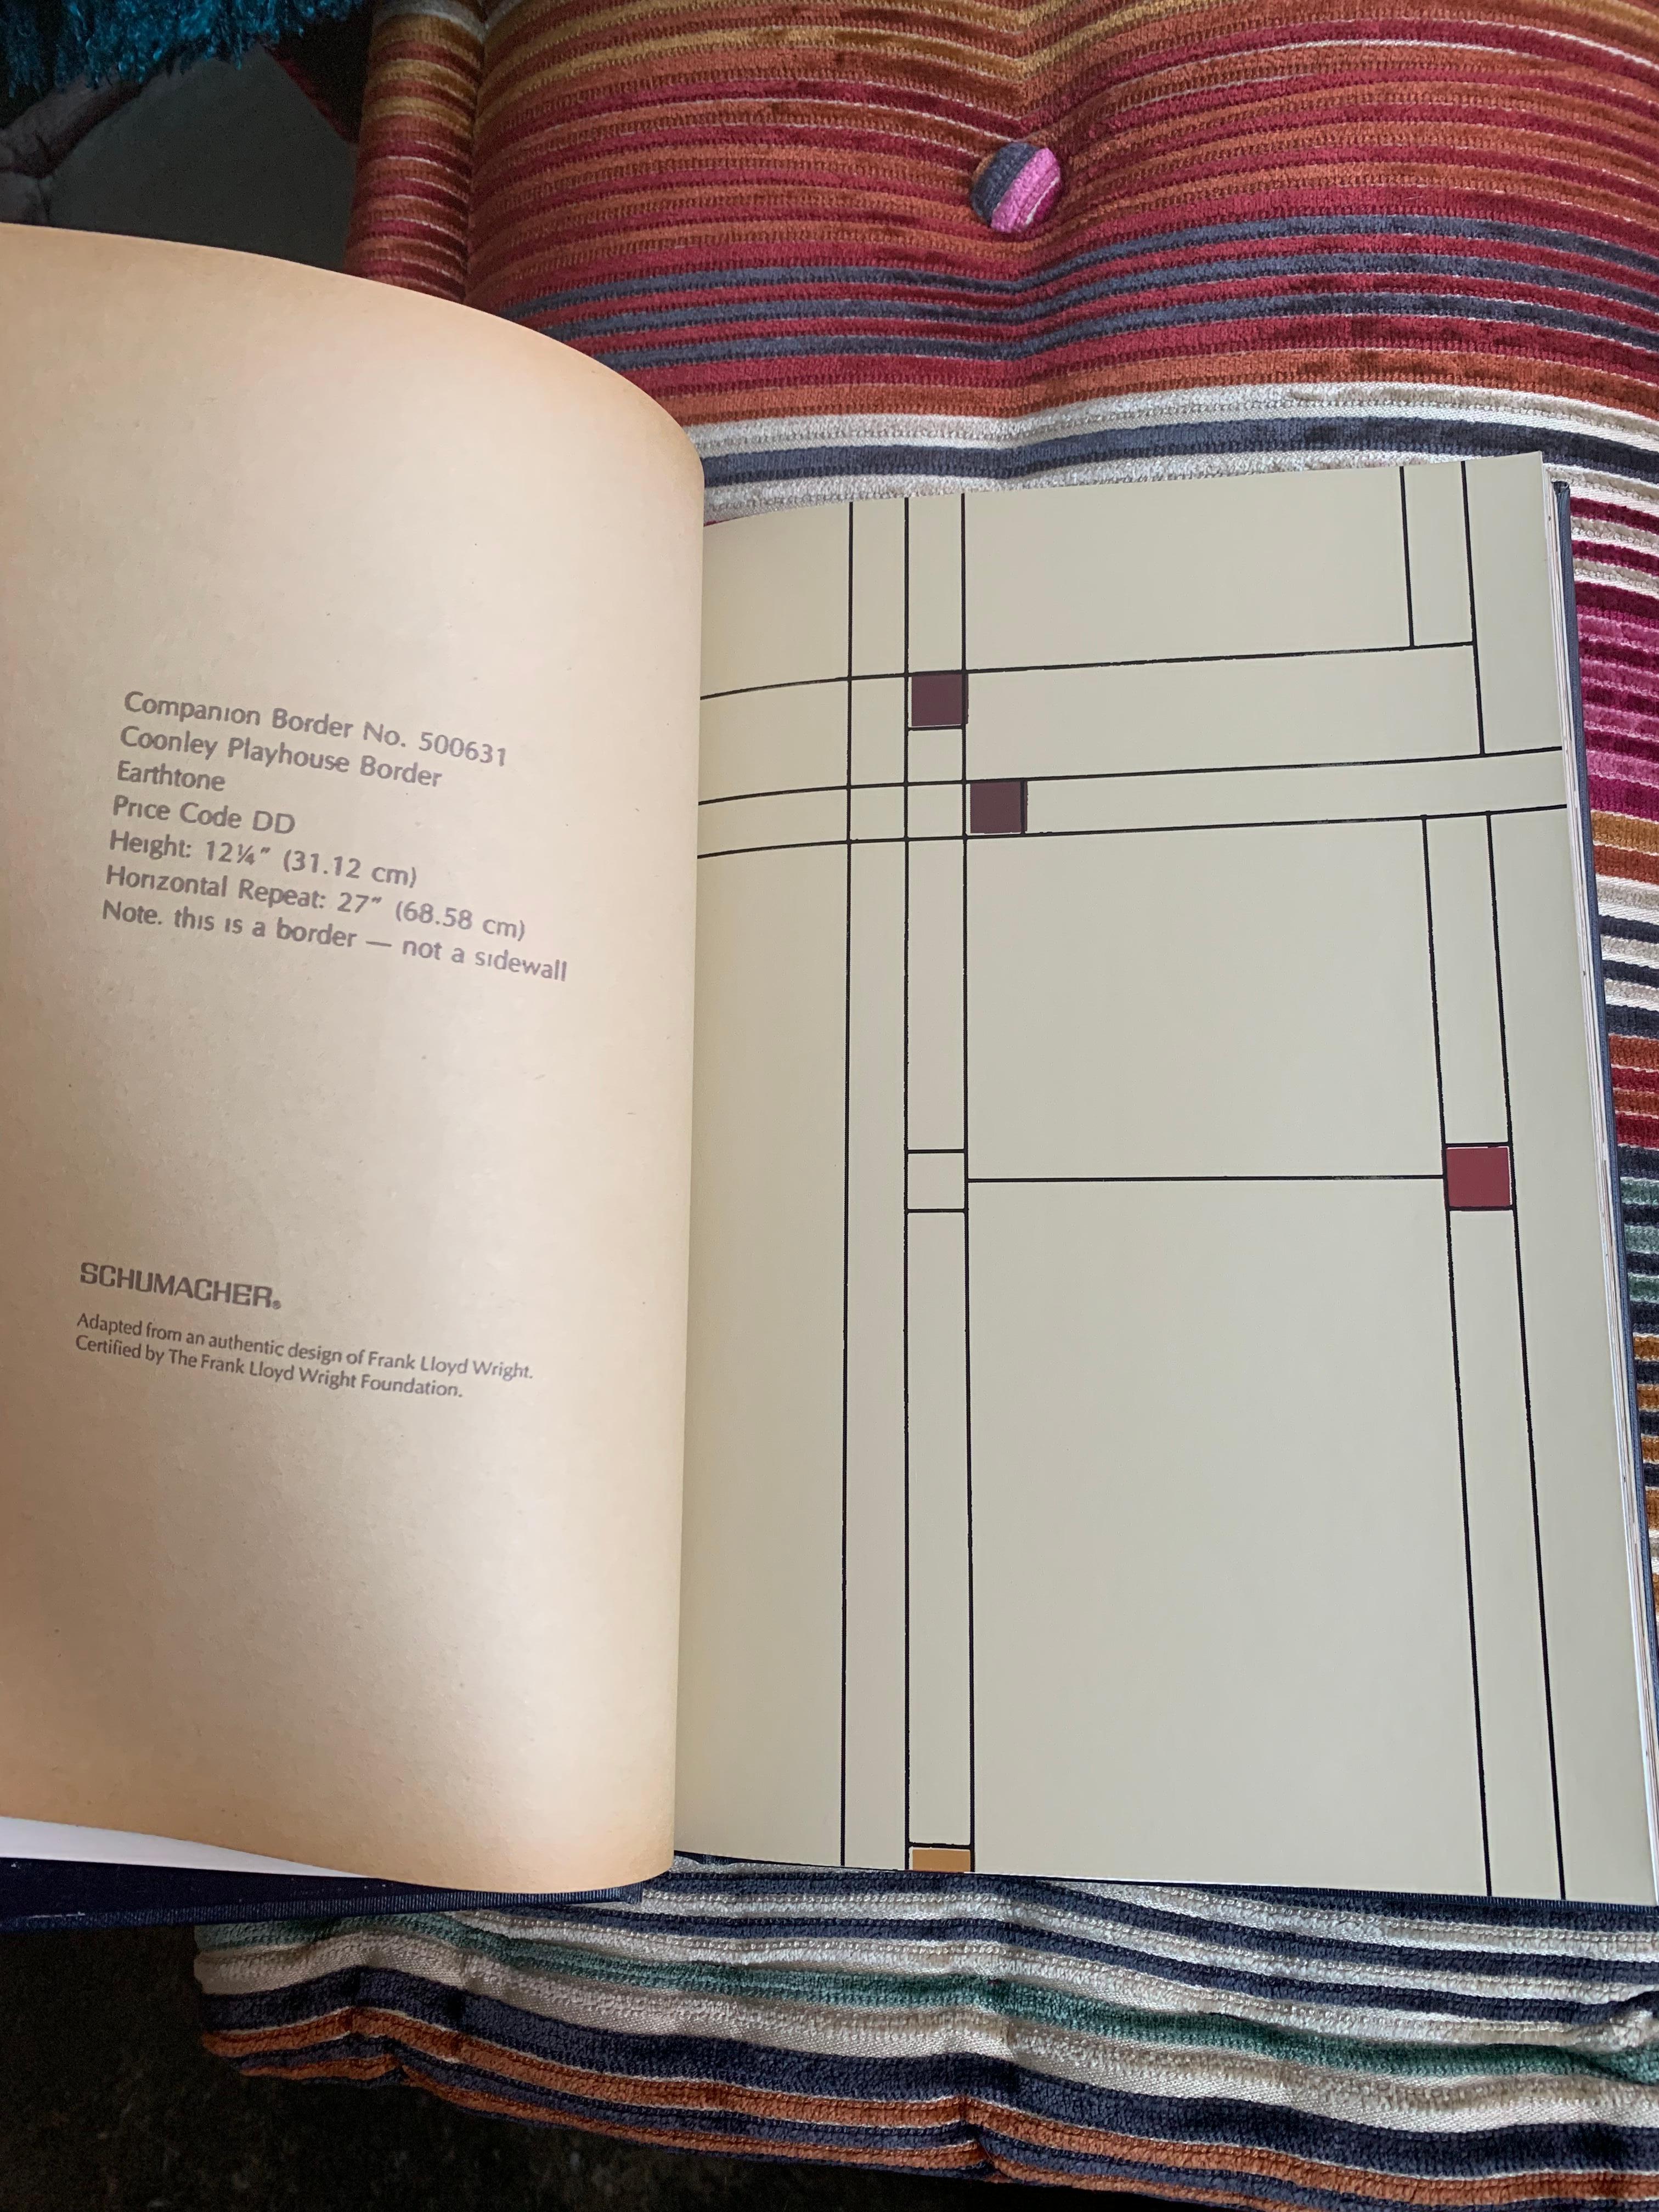 Mission Frank Lloyd Wright Schumacher Wallcoverings Catalogue Reference Book 1986